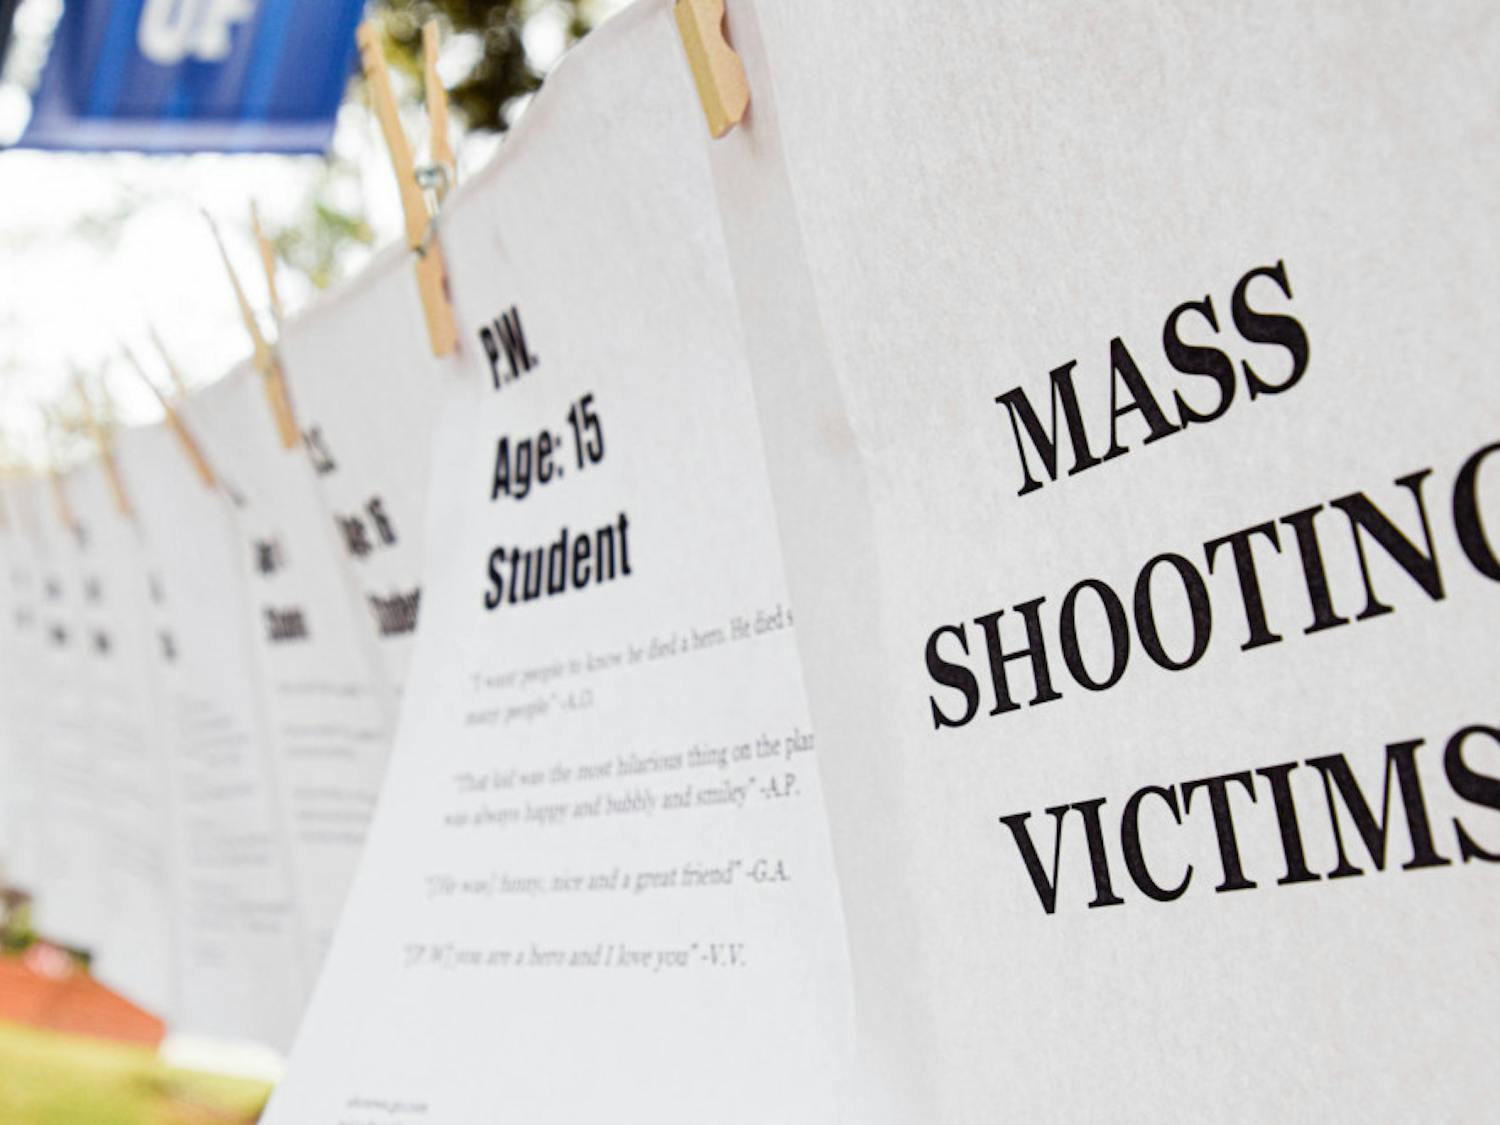 March For Our Lives Gainesville pins up pieces of paper with information about people who died in various mass shootings, such as their name, age and what they were like as told by loved ones.